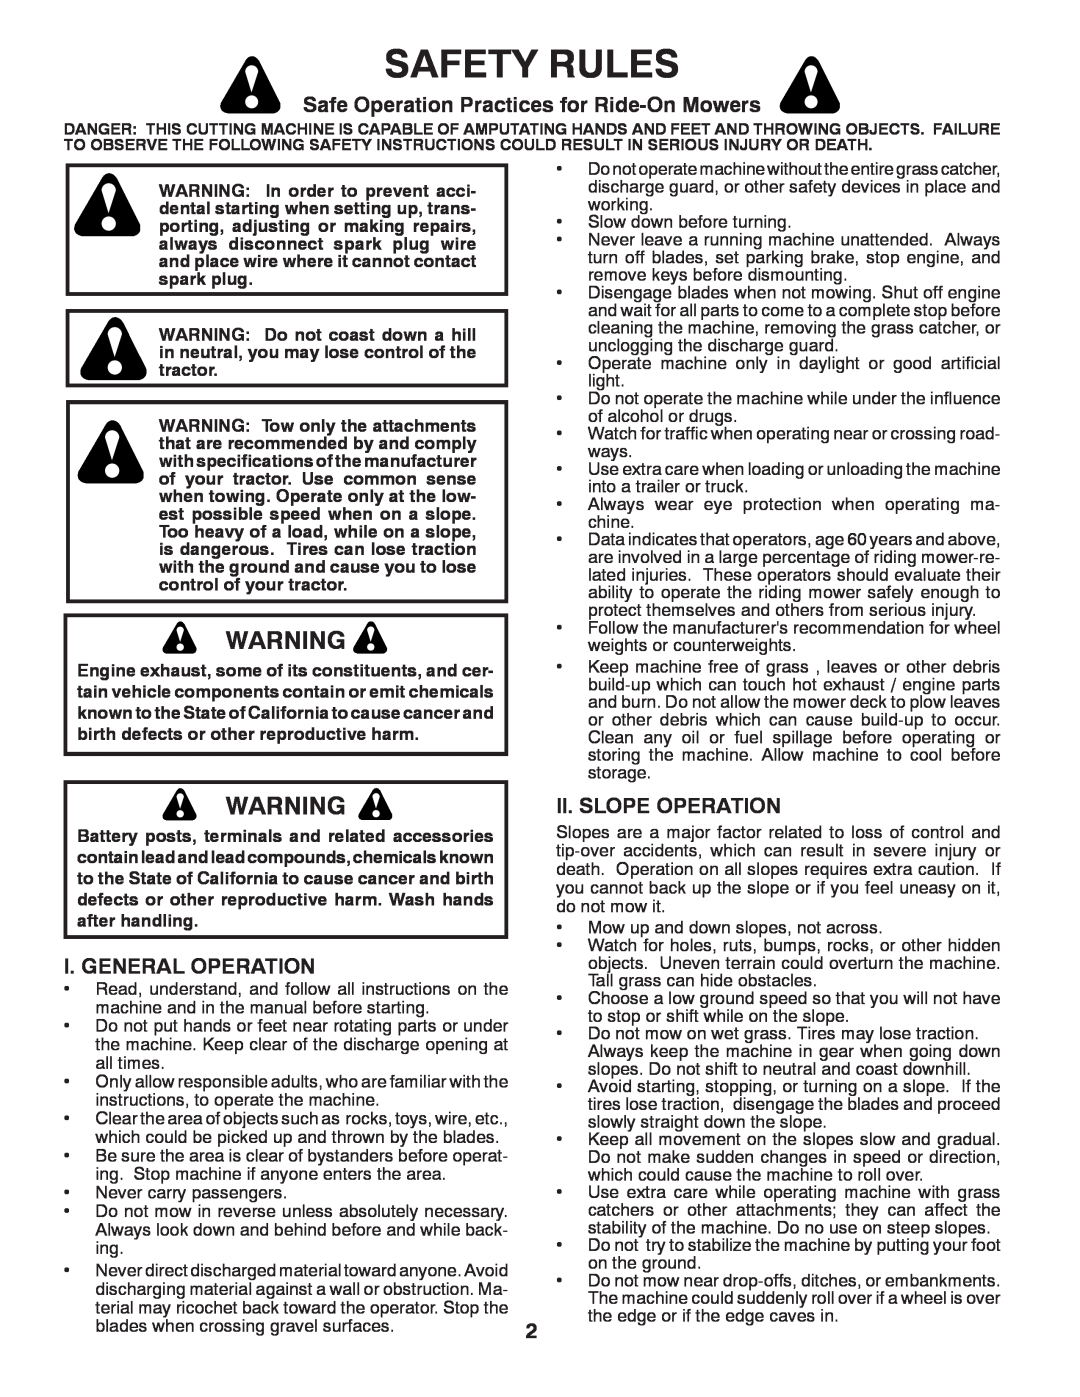 Poulan 425001 manual Safety Rules, Safe Operation Practices for Ride-On Mowers, I. General Operation, Ii. Slope Operation 